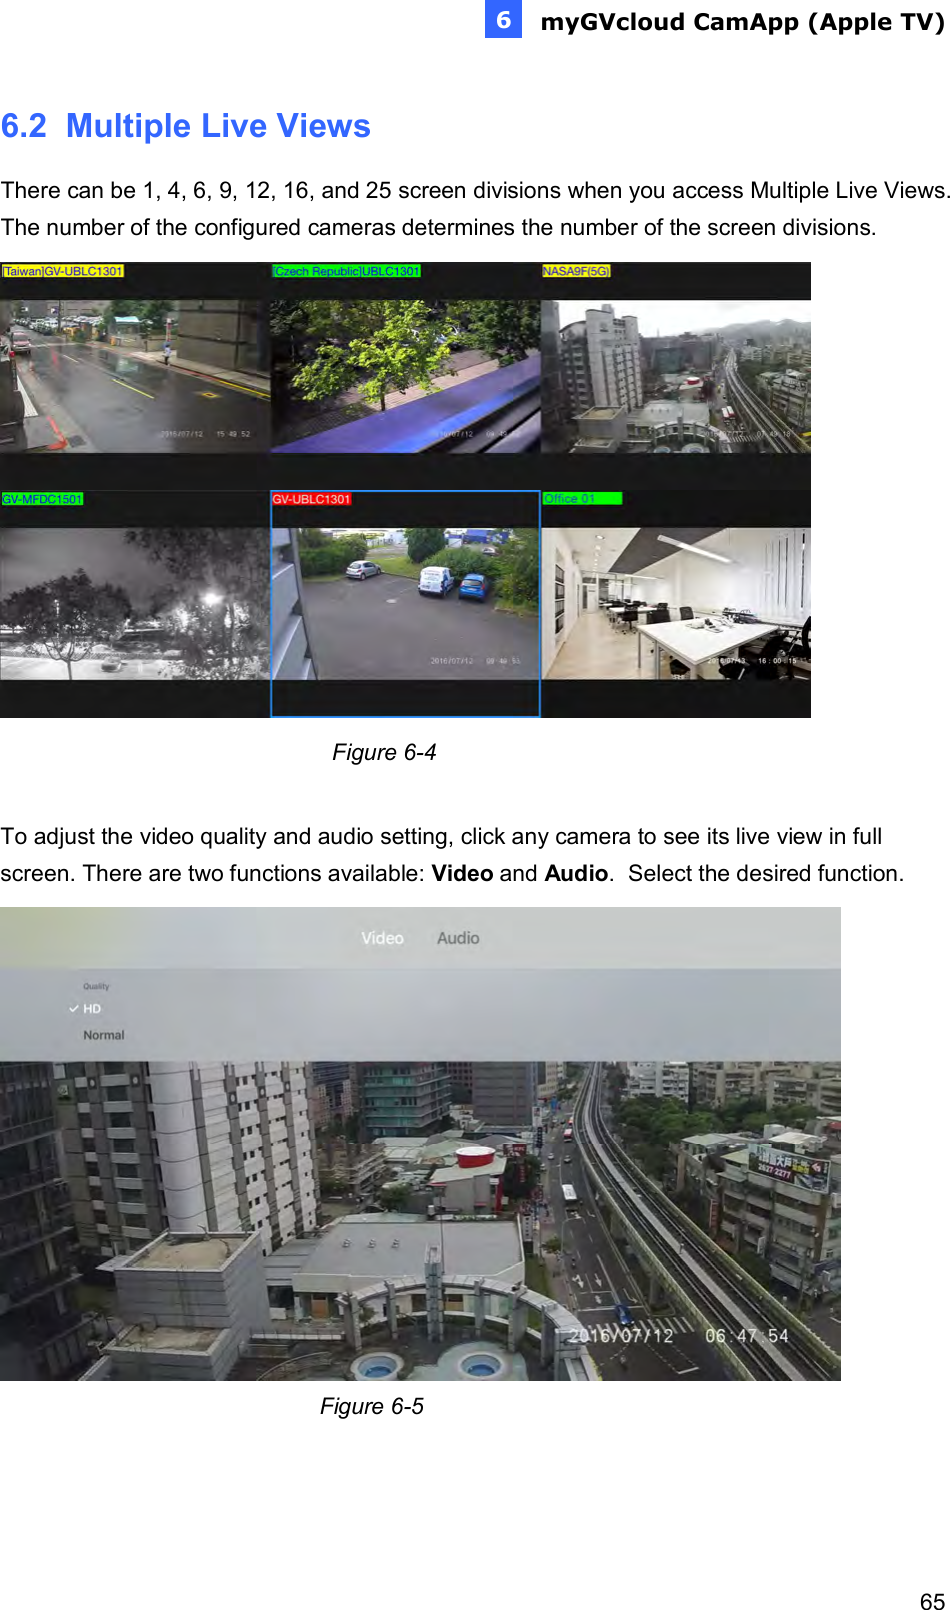  myGVcloud CamApp (Apple TV)     656e 6.2  Multiple Live Views There can be 1, 4, 6, 9, 12, 16, and 25 screen divisions when you access Multiple Live Views. The number of the configured cameras determines the number of the screen divisions.                                                      Figure 6-4  To adjust the video quality and audio setting, click any camera to see its live view in full screen. There are two functions available: Video and Audio.  Select the desired function.                                                    Figure 6-5    